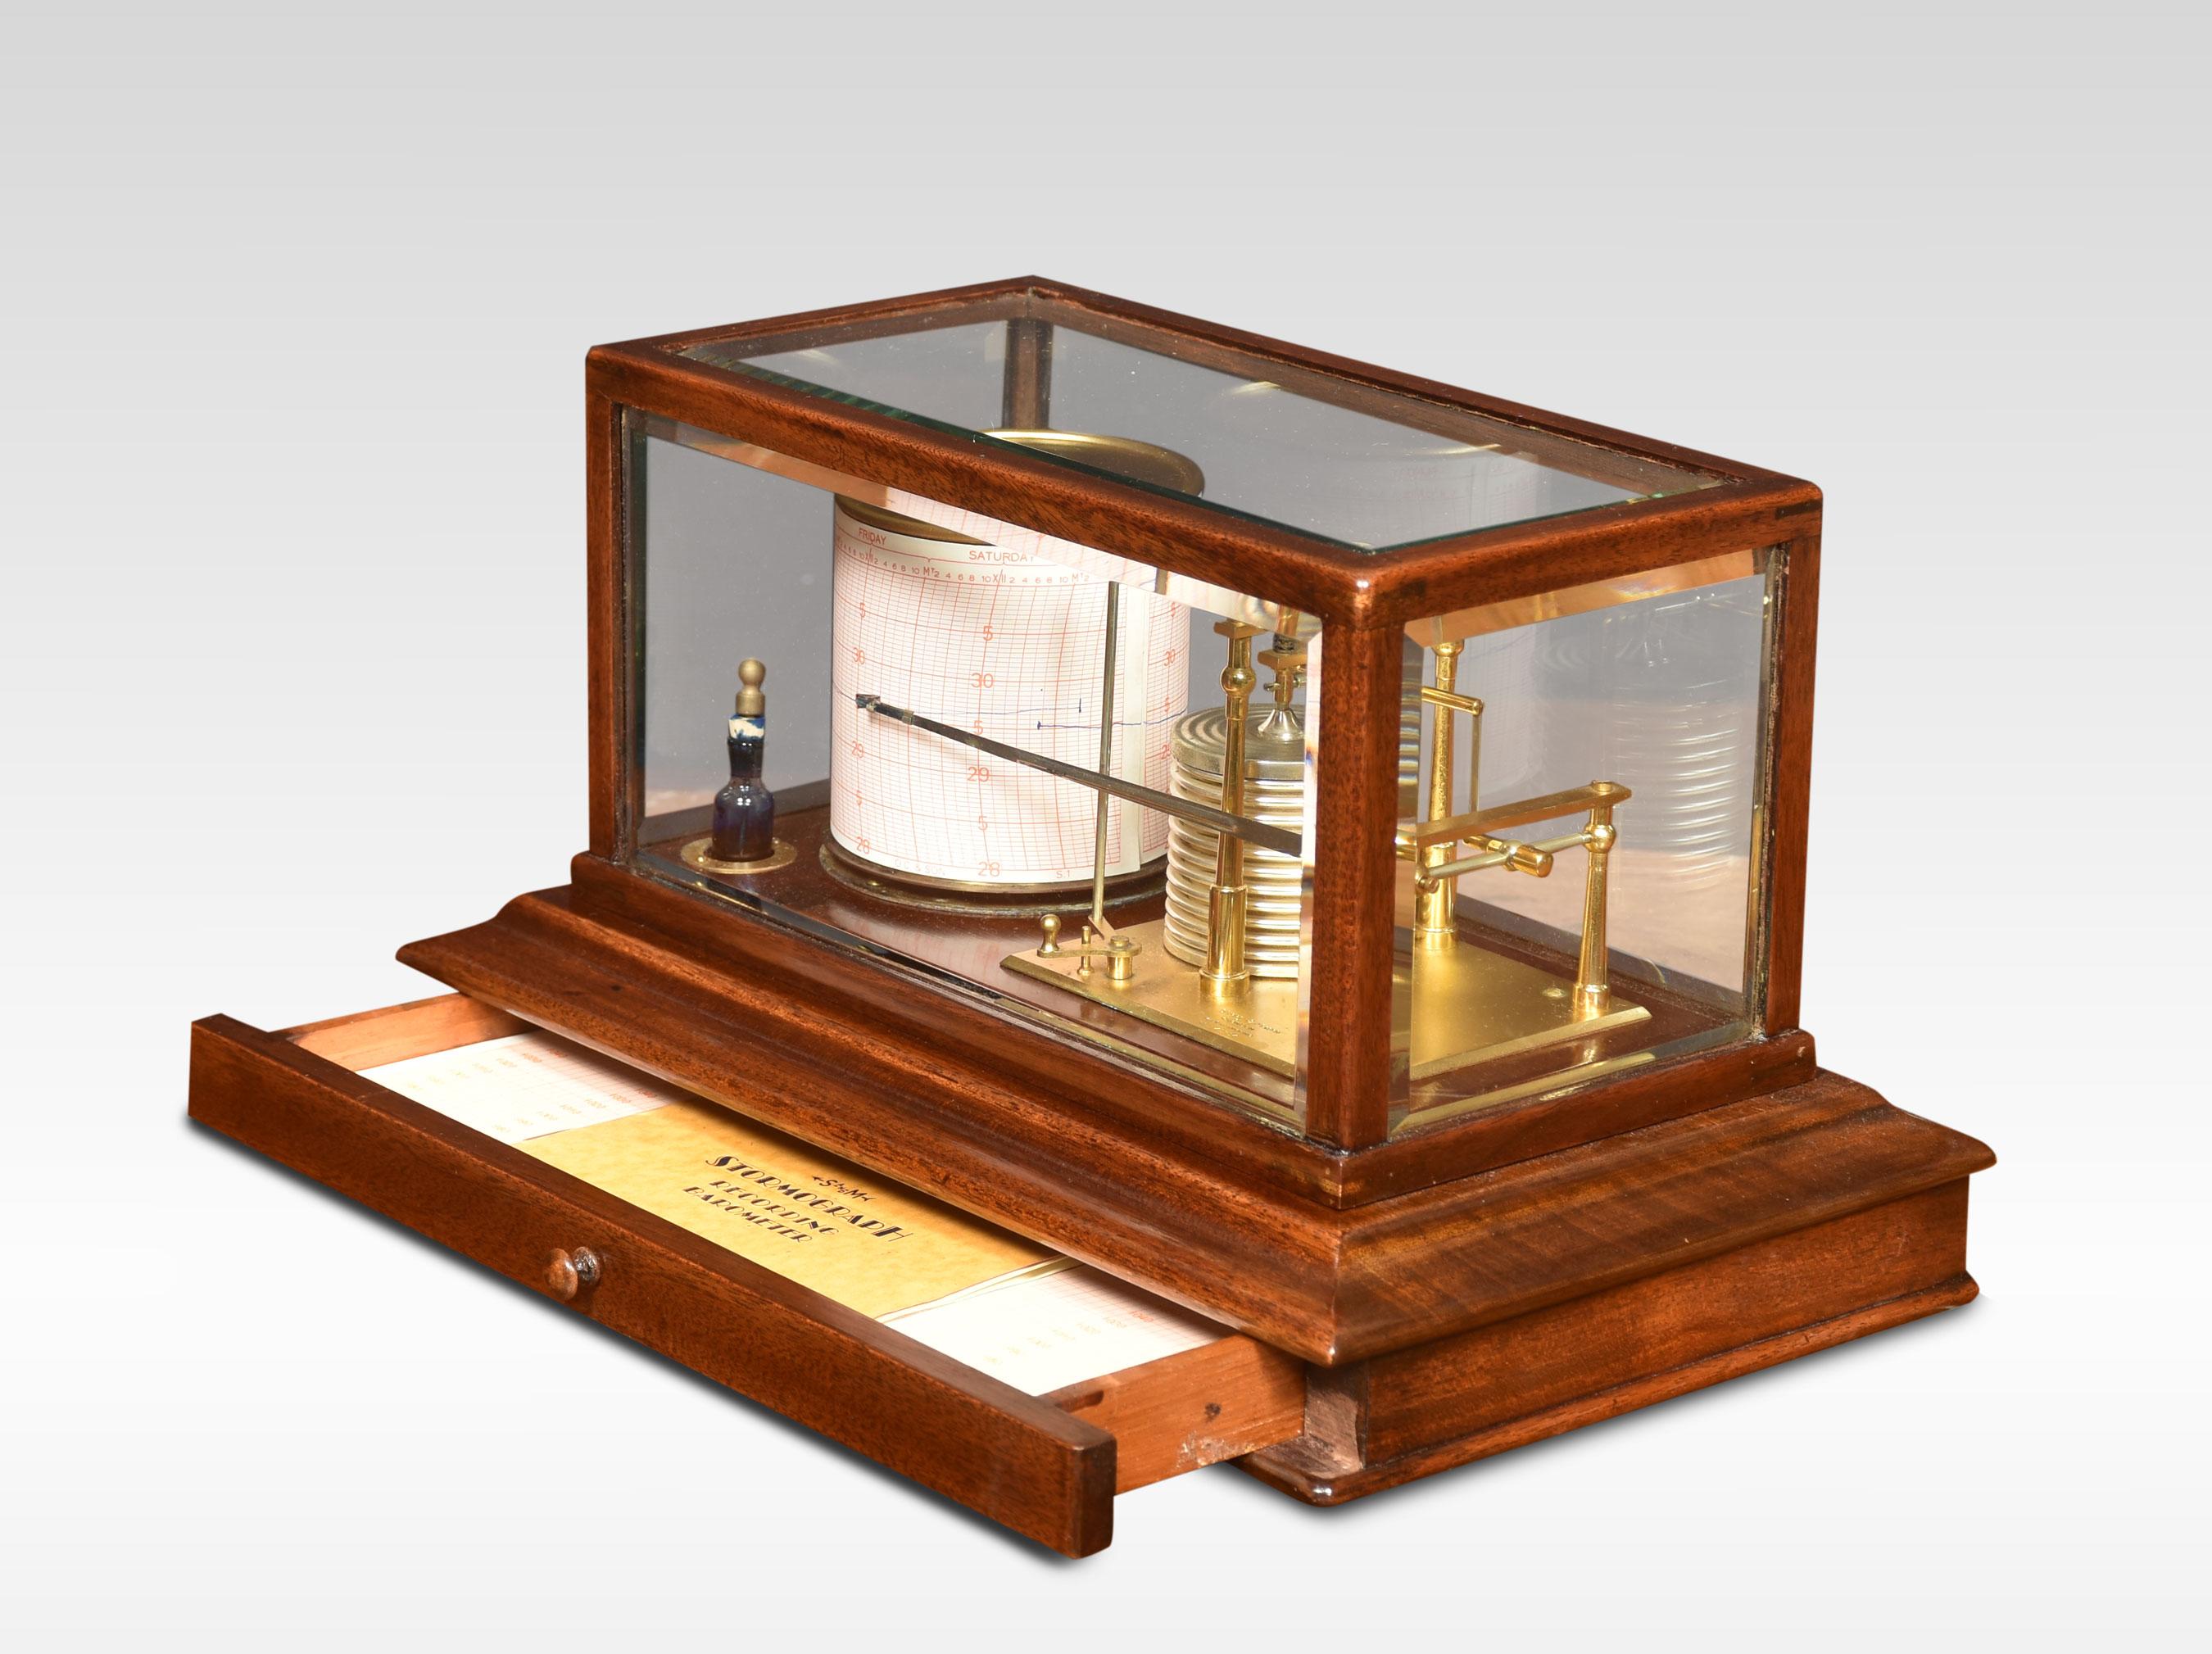 Short and Mason walnut-cased Barograph, having five bevelled glazed removable lid, and a drawer below to house the charts. The mechanical eight-day movement is housed in the drum, fitted with a seven-day chart that covers one full rotation of the